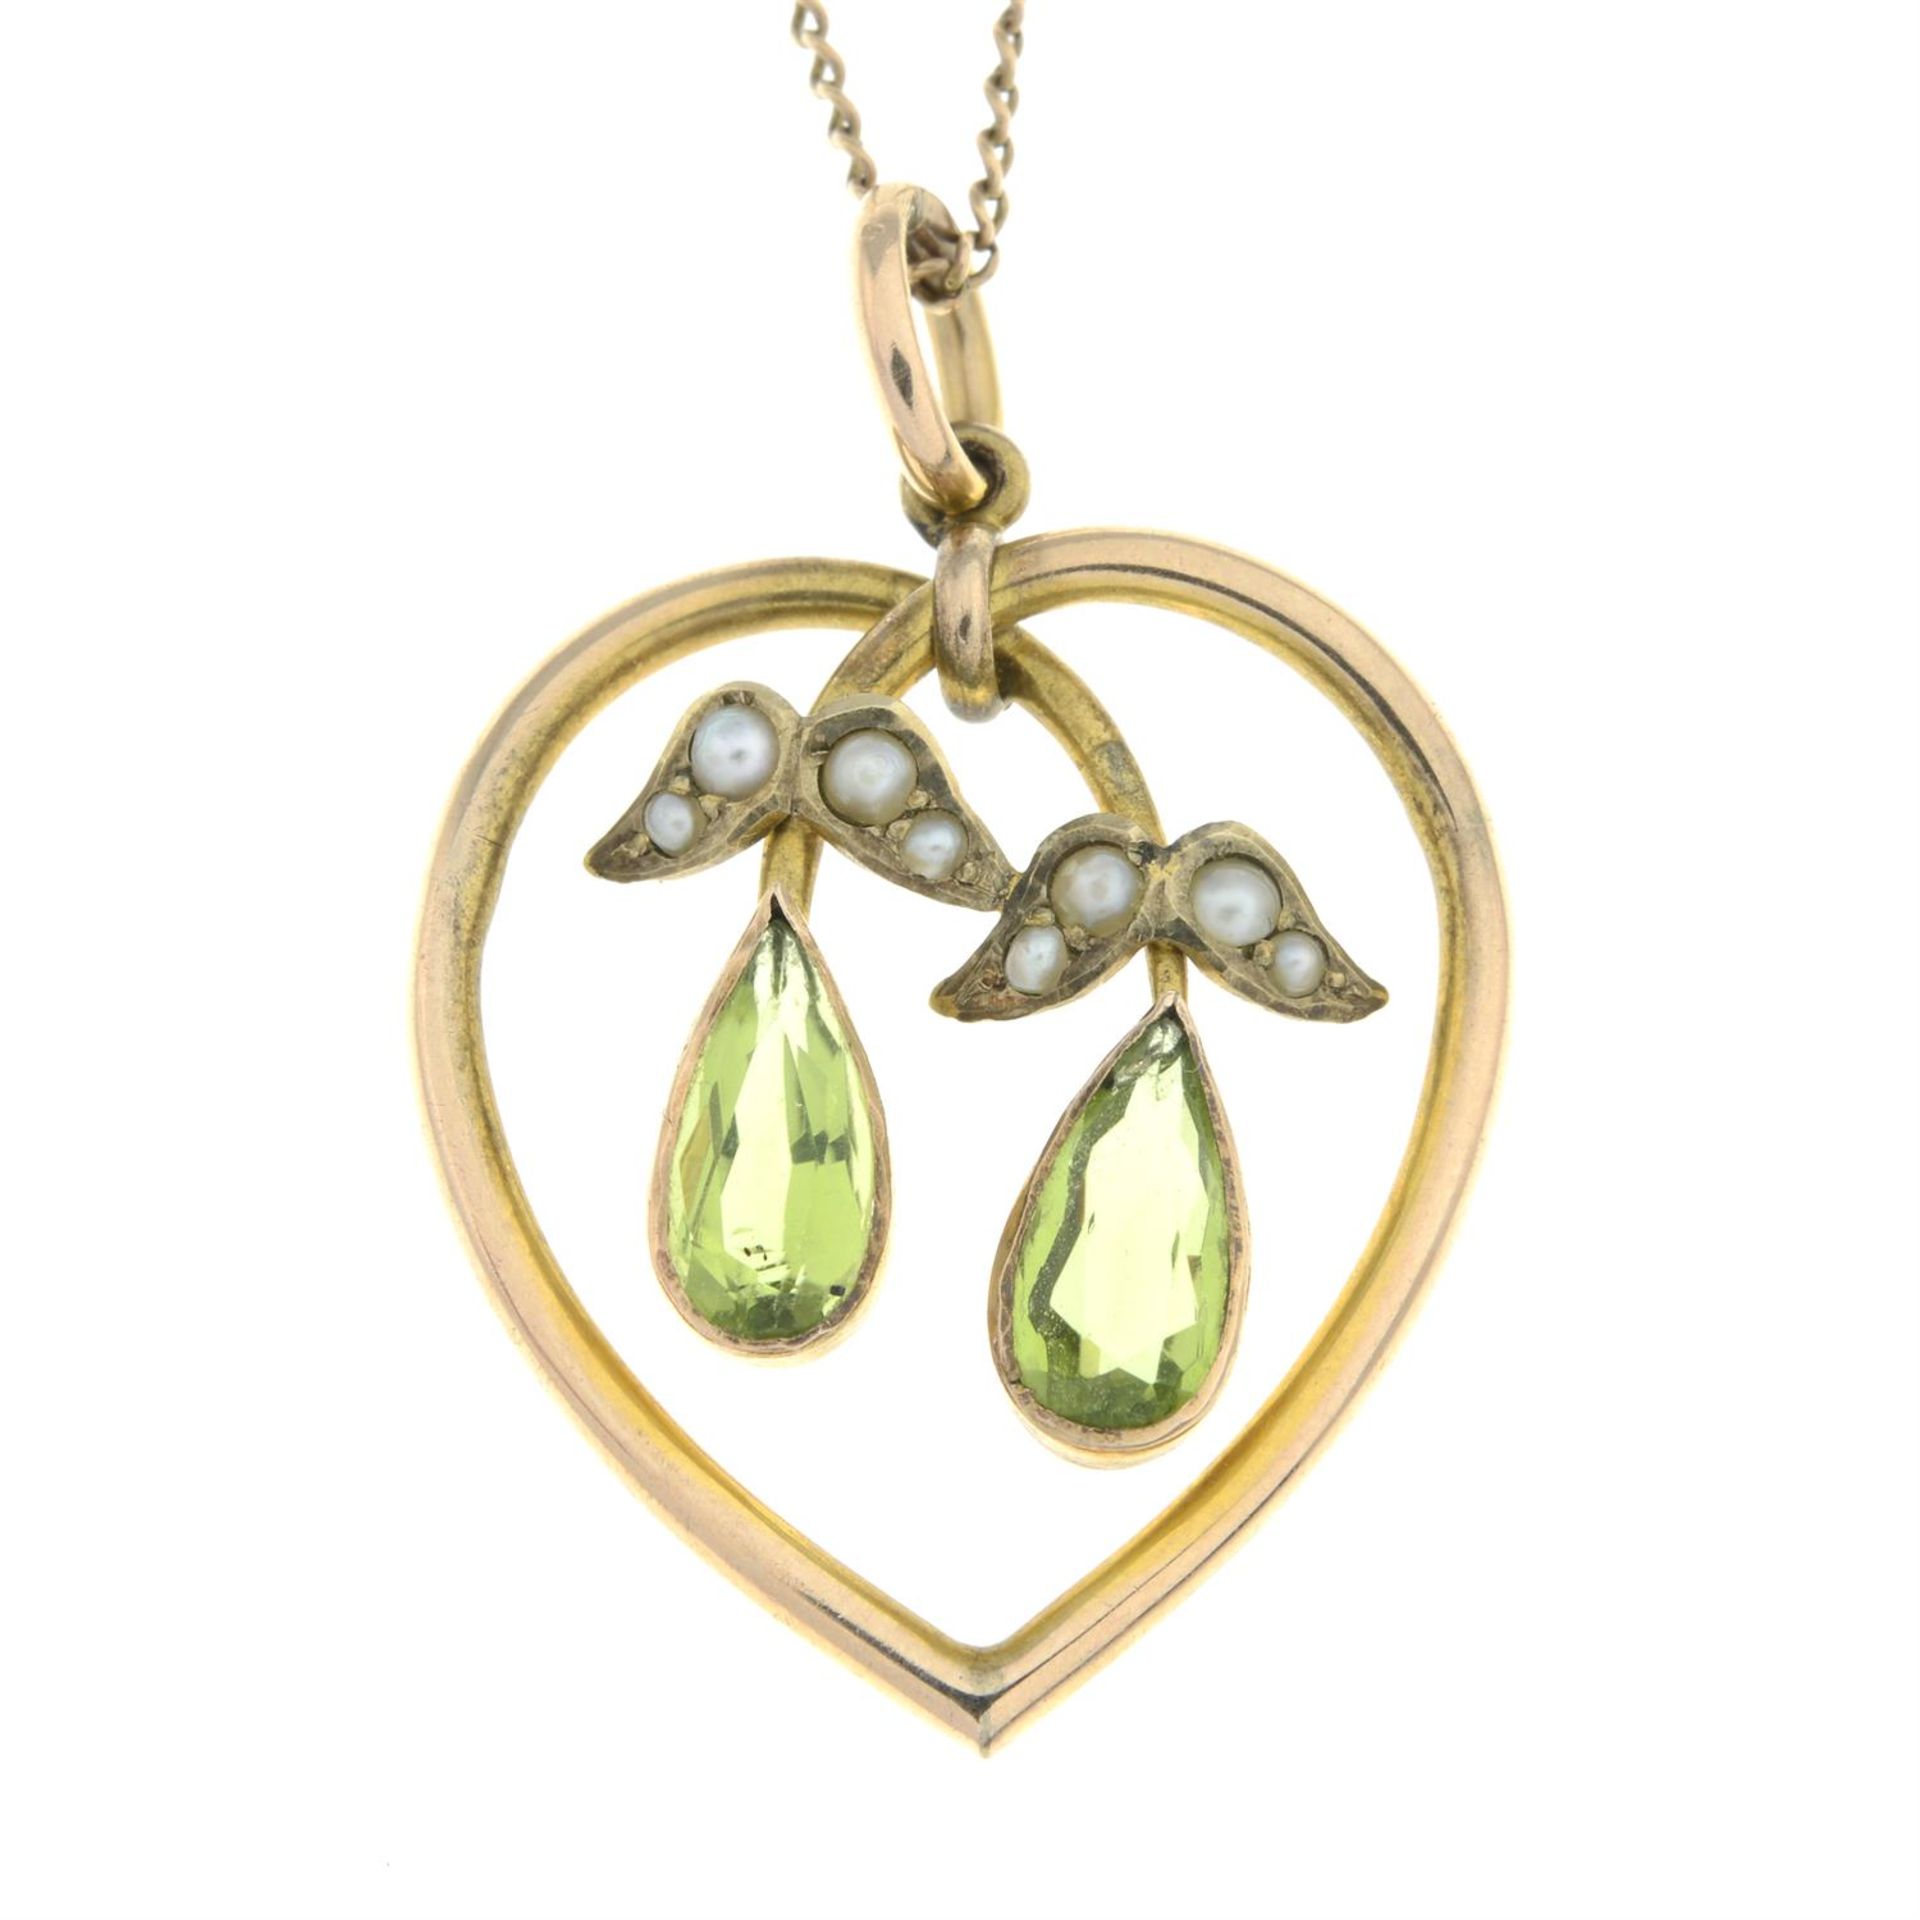 An Edwardian 9ct gold peridot and split pearl pendant, with 9ct gold chain.